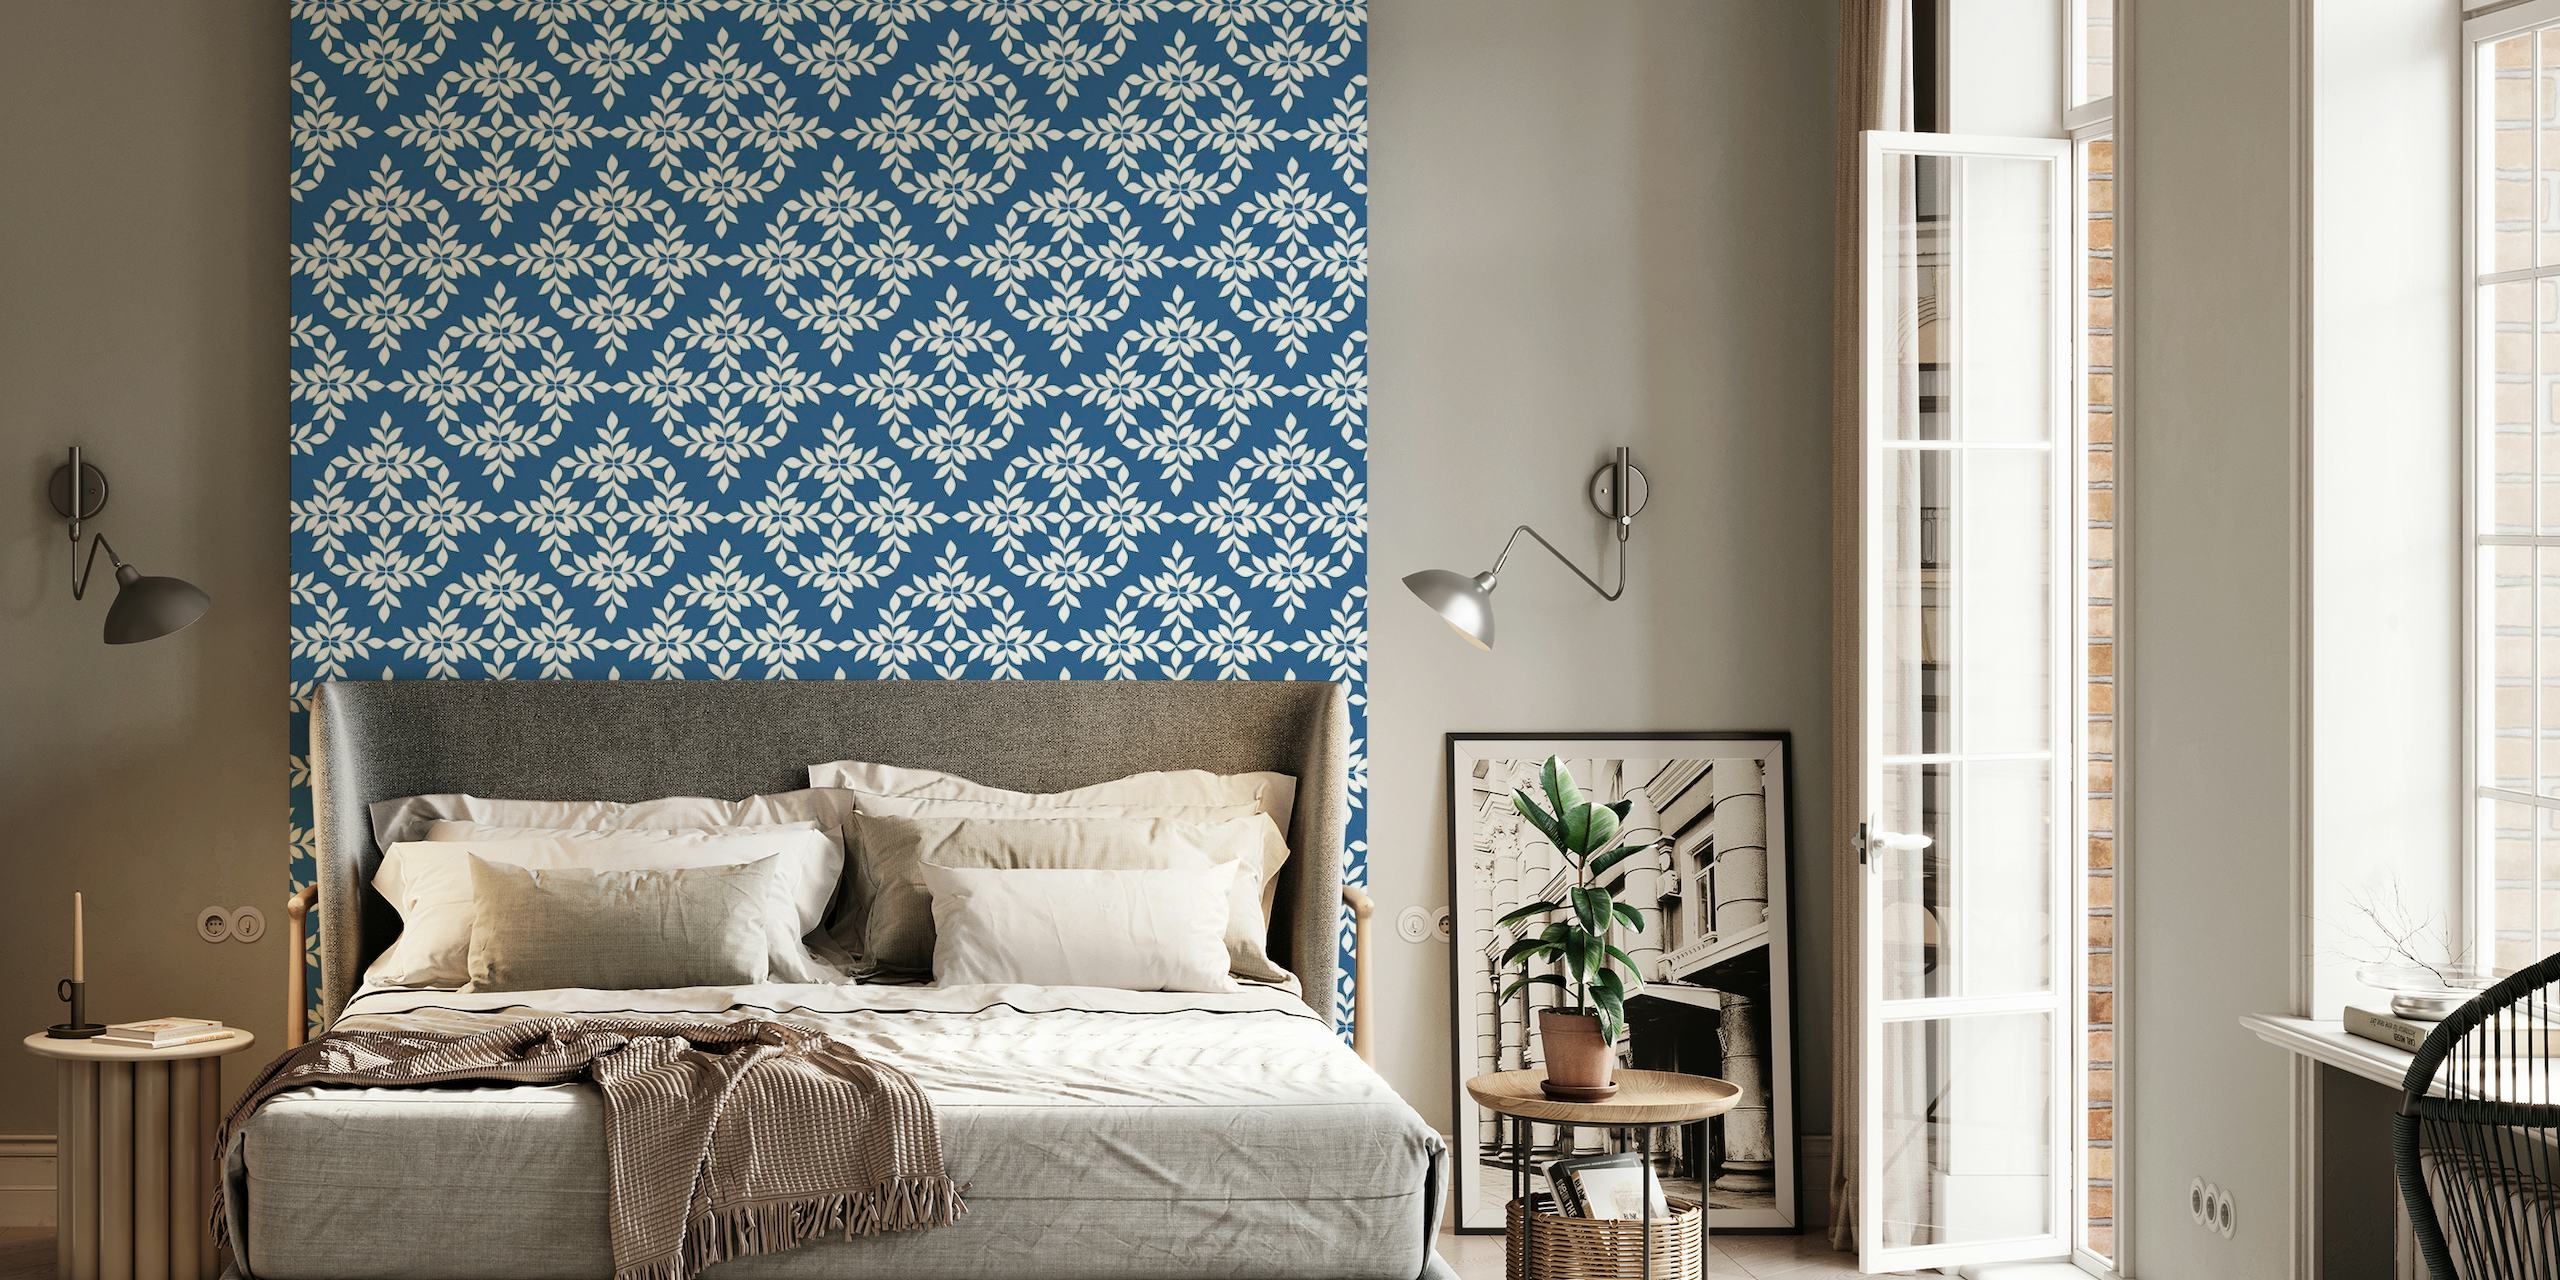 Indigo blue and white patterned wall mural with intricate designs